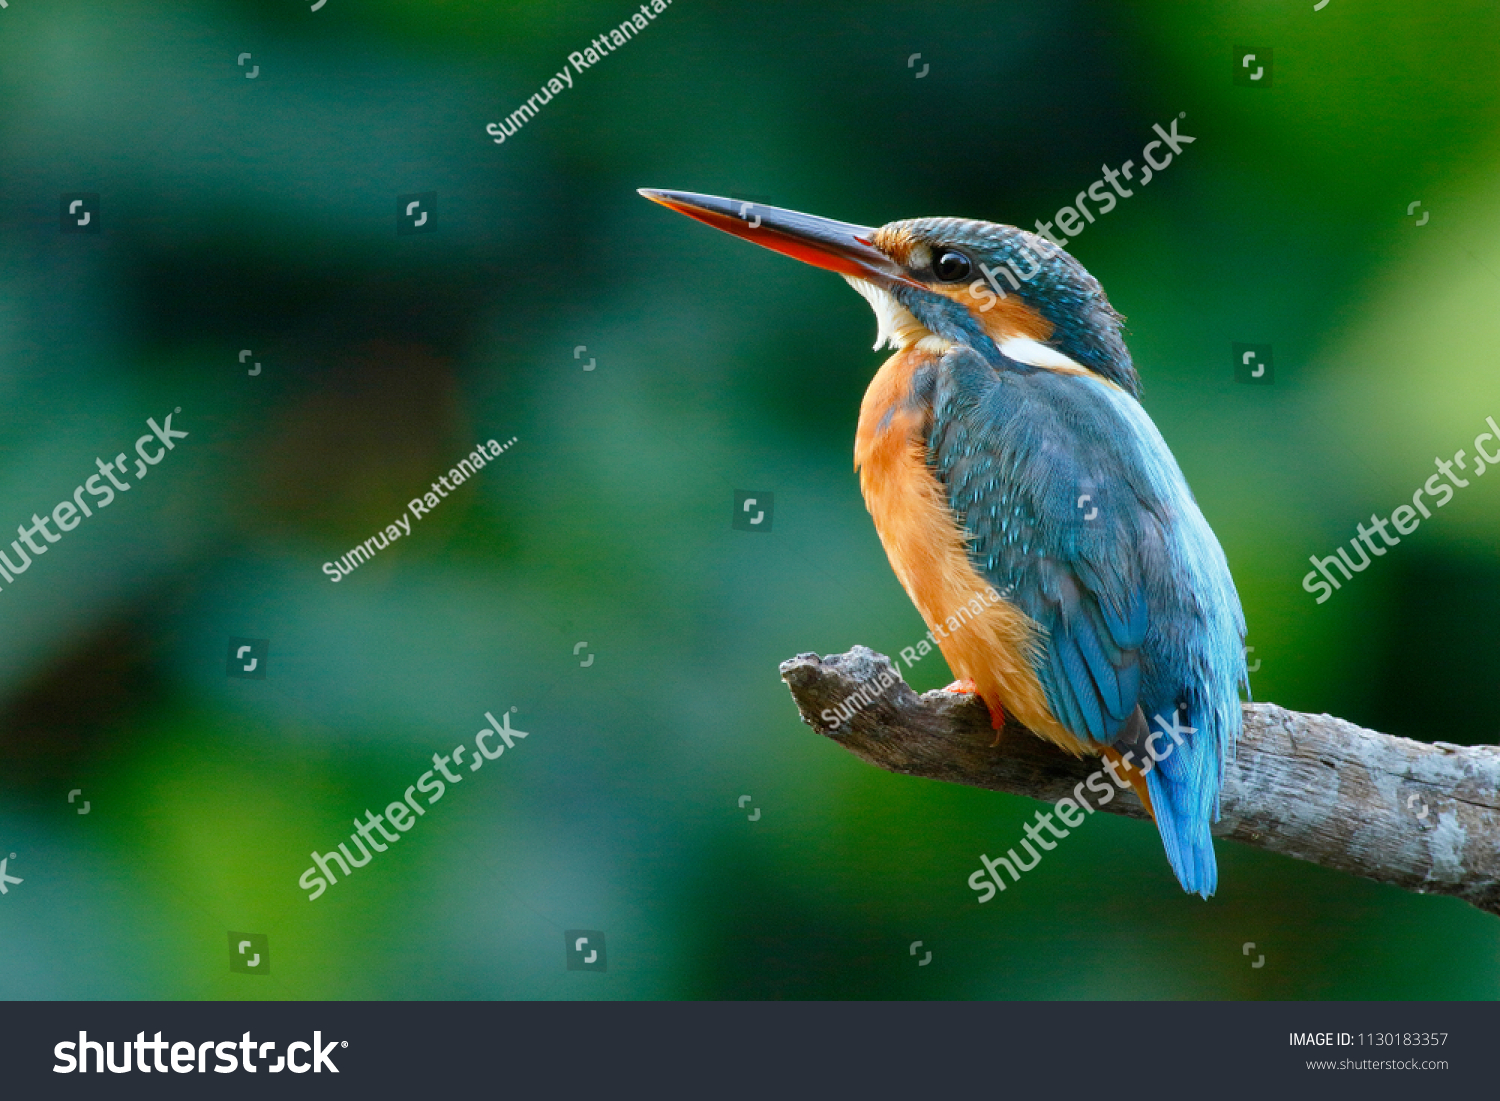 The common kingfisher (Alcedo atthis) wetlands birds's colored feathers from different birds that live in ponds, swamps. Clamp winter migratory birds stayed about 3 months, Bang Poo, Thailand. #1130183357